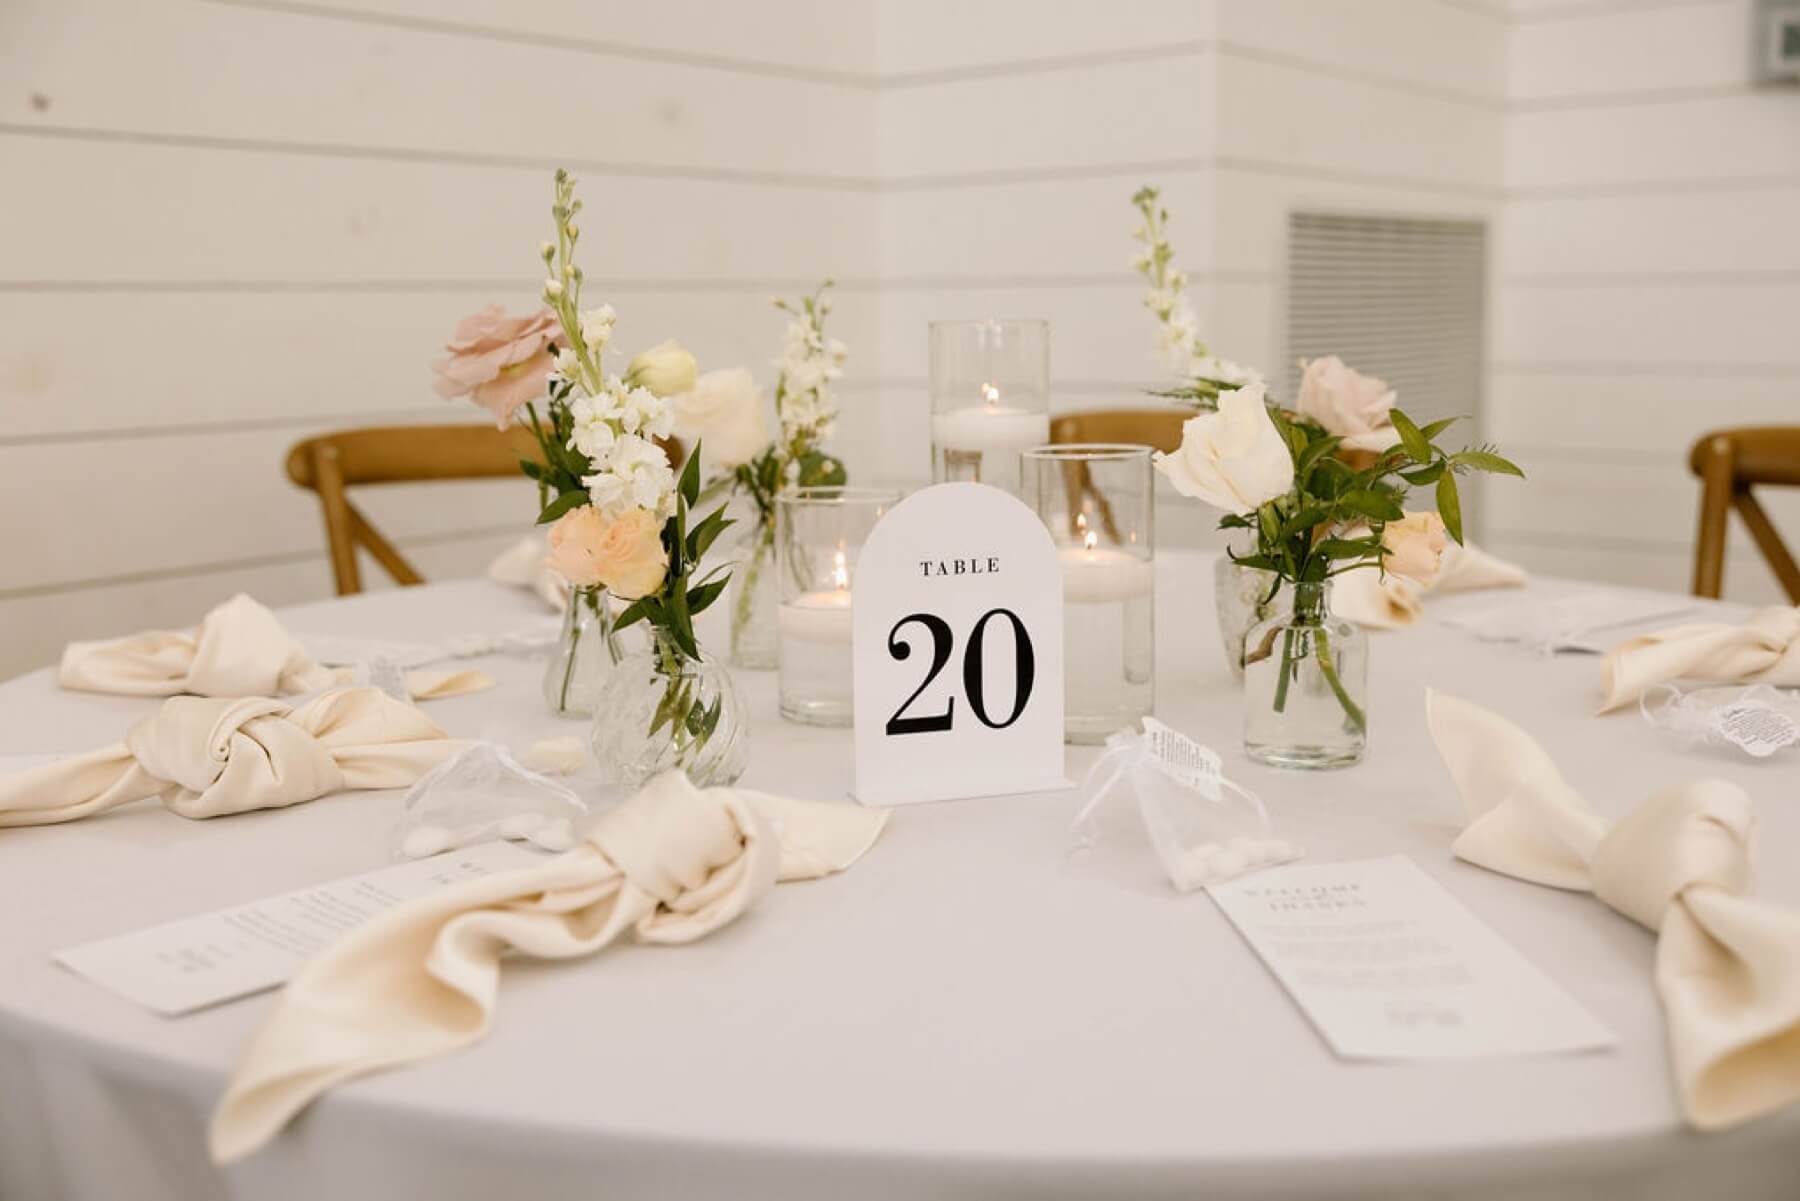 Reception decor including white napkins, flowers, candles, and table numbers